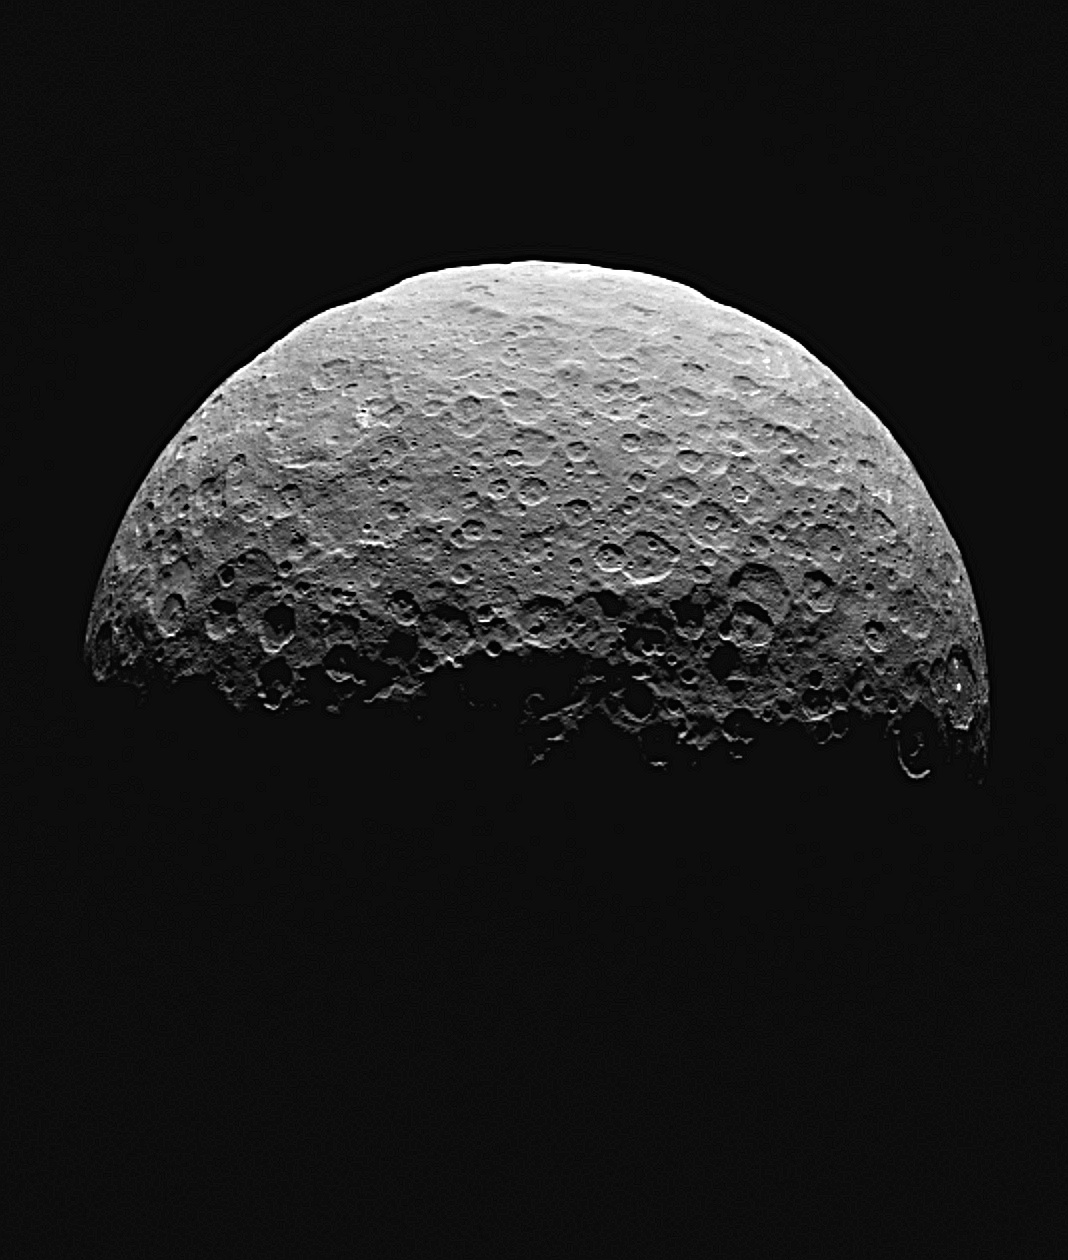 Ceres is the largest object in the asteroid belt between Mars and Jupiter. Credit: NASA/JPL-Caltech/UCLA/MPS/DLR/IDA, taken by Dawn Framing Camera